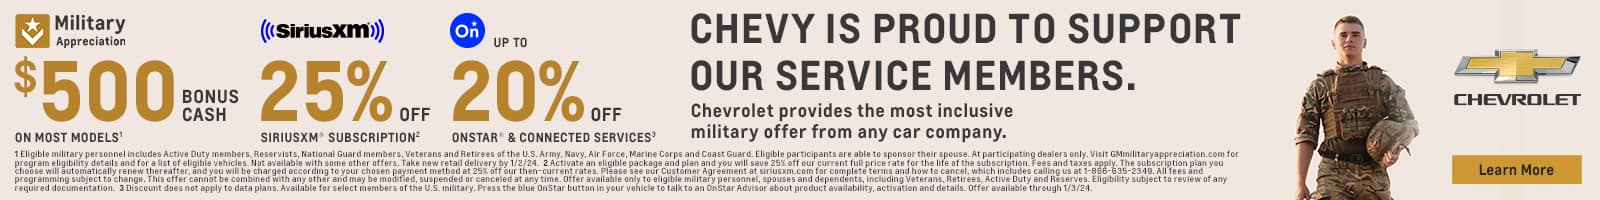 Chevrolet is proud to support our Service Members